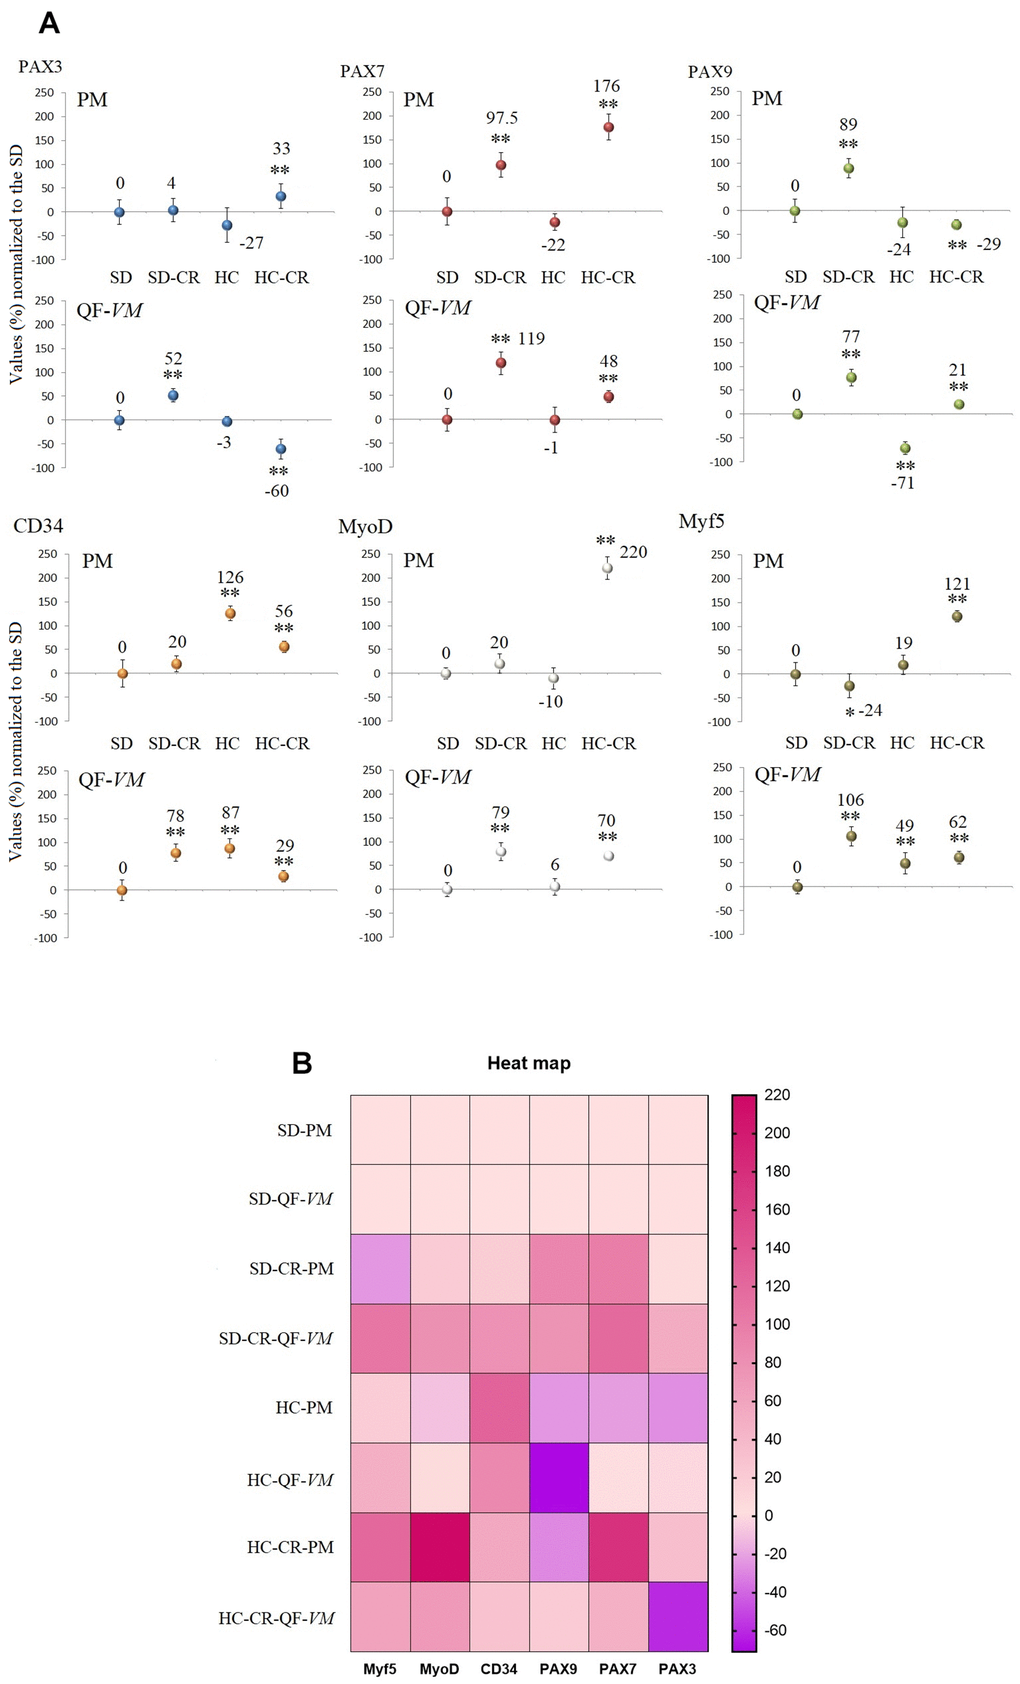 Gene expression of satellite markers. cDNA from PM and QF-VM was obtained with a Takara RR047Q kit. qPCR was performed with 100 ng of target DNA to measure PAX3, PAX7, PAX9, CD34, MyoD, Myf5, and 18s rRNA (reference gene) expression (A). For each gene expressed as percentage (%), the SD value was set to 0, and the compared samples were normalized to this level. Positive values represent upregulation. Negative values represent downregulation. Each marker was analyzed with SYBR Green fluorescence detection, and the transcript levels were normalized to those of the endogenous control 18s rRNA. The data are the mean ± s.d. *P B).